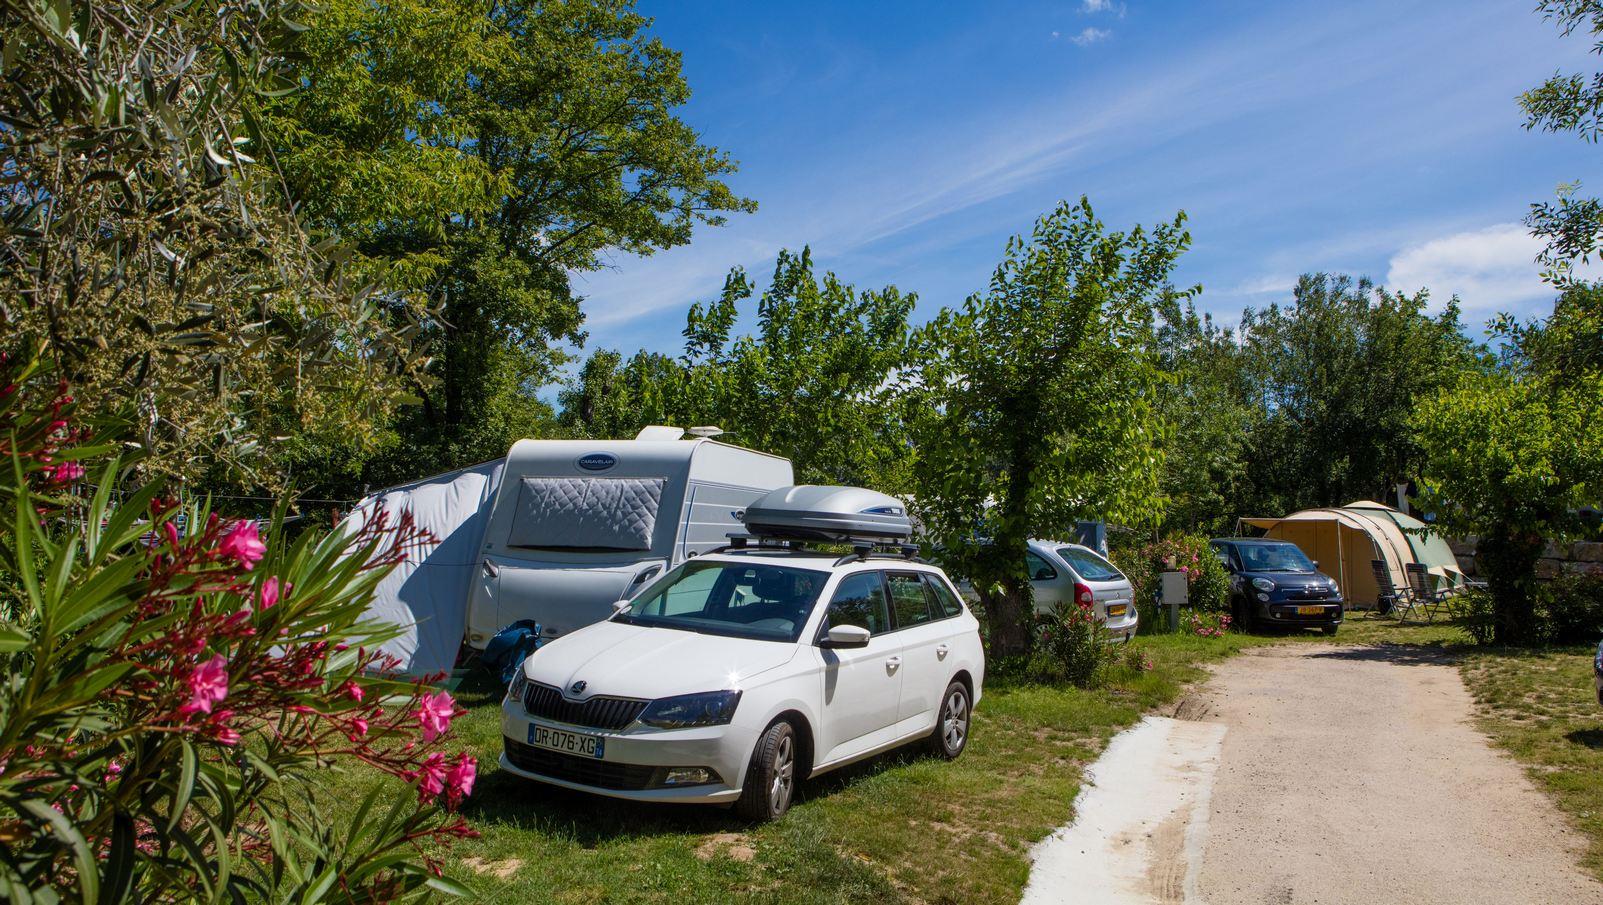 Pitch - Camping Pitches With Private Bathroom - Camping Les Coudoulets